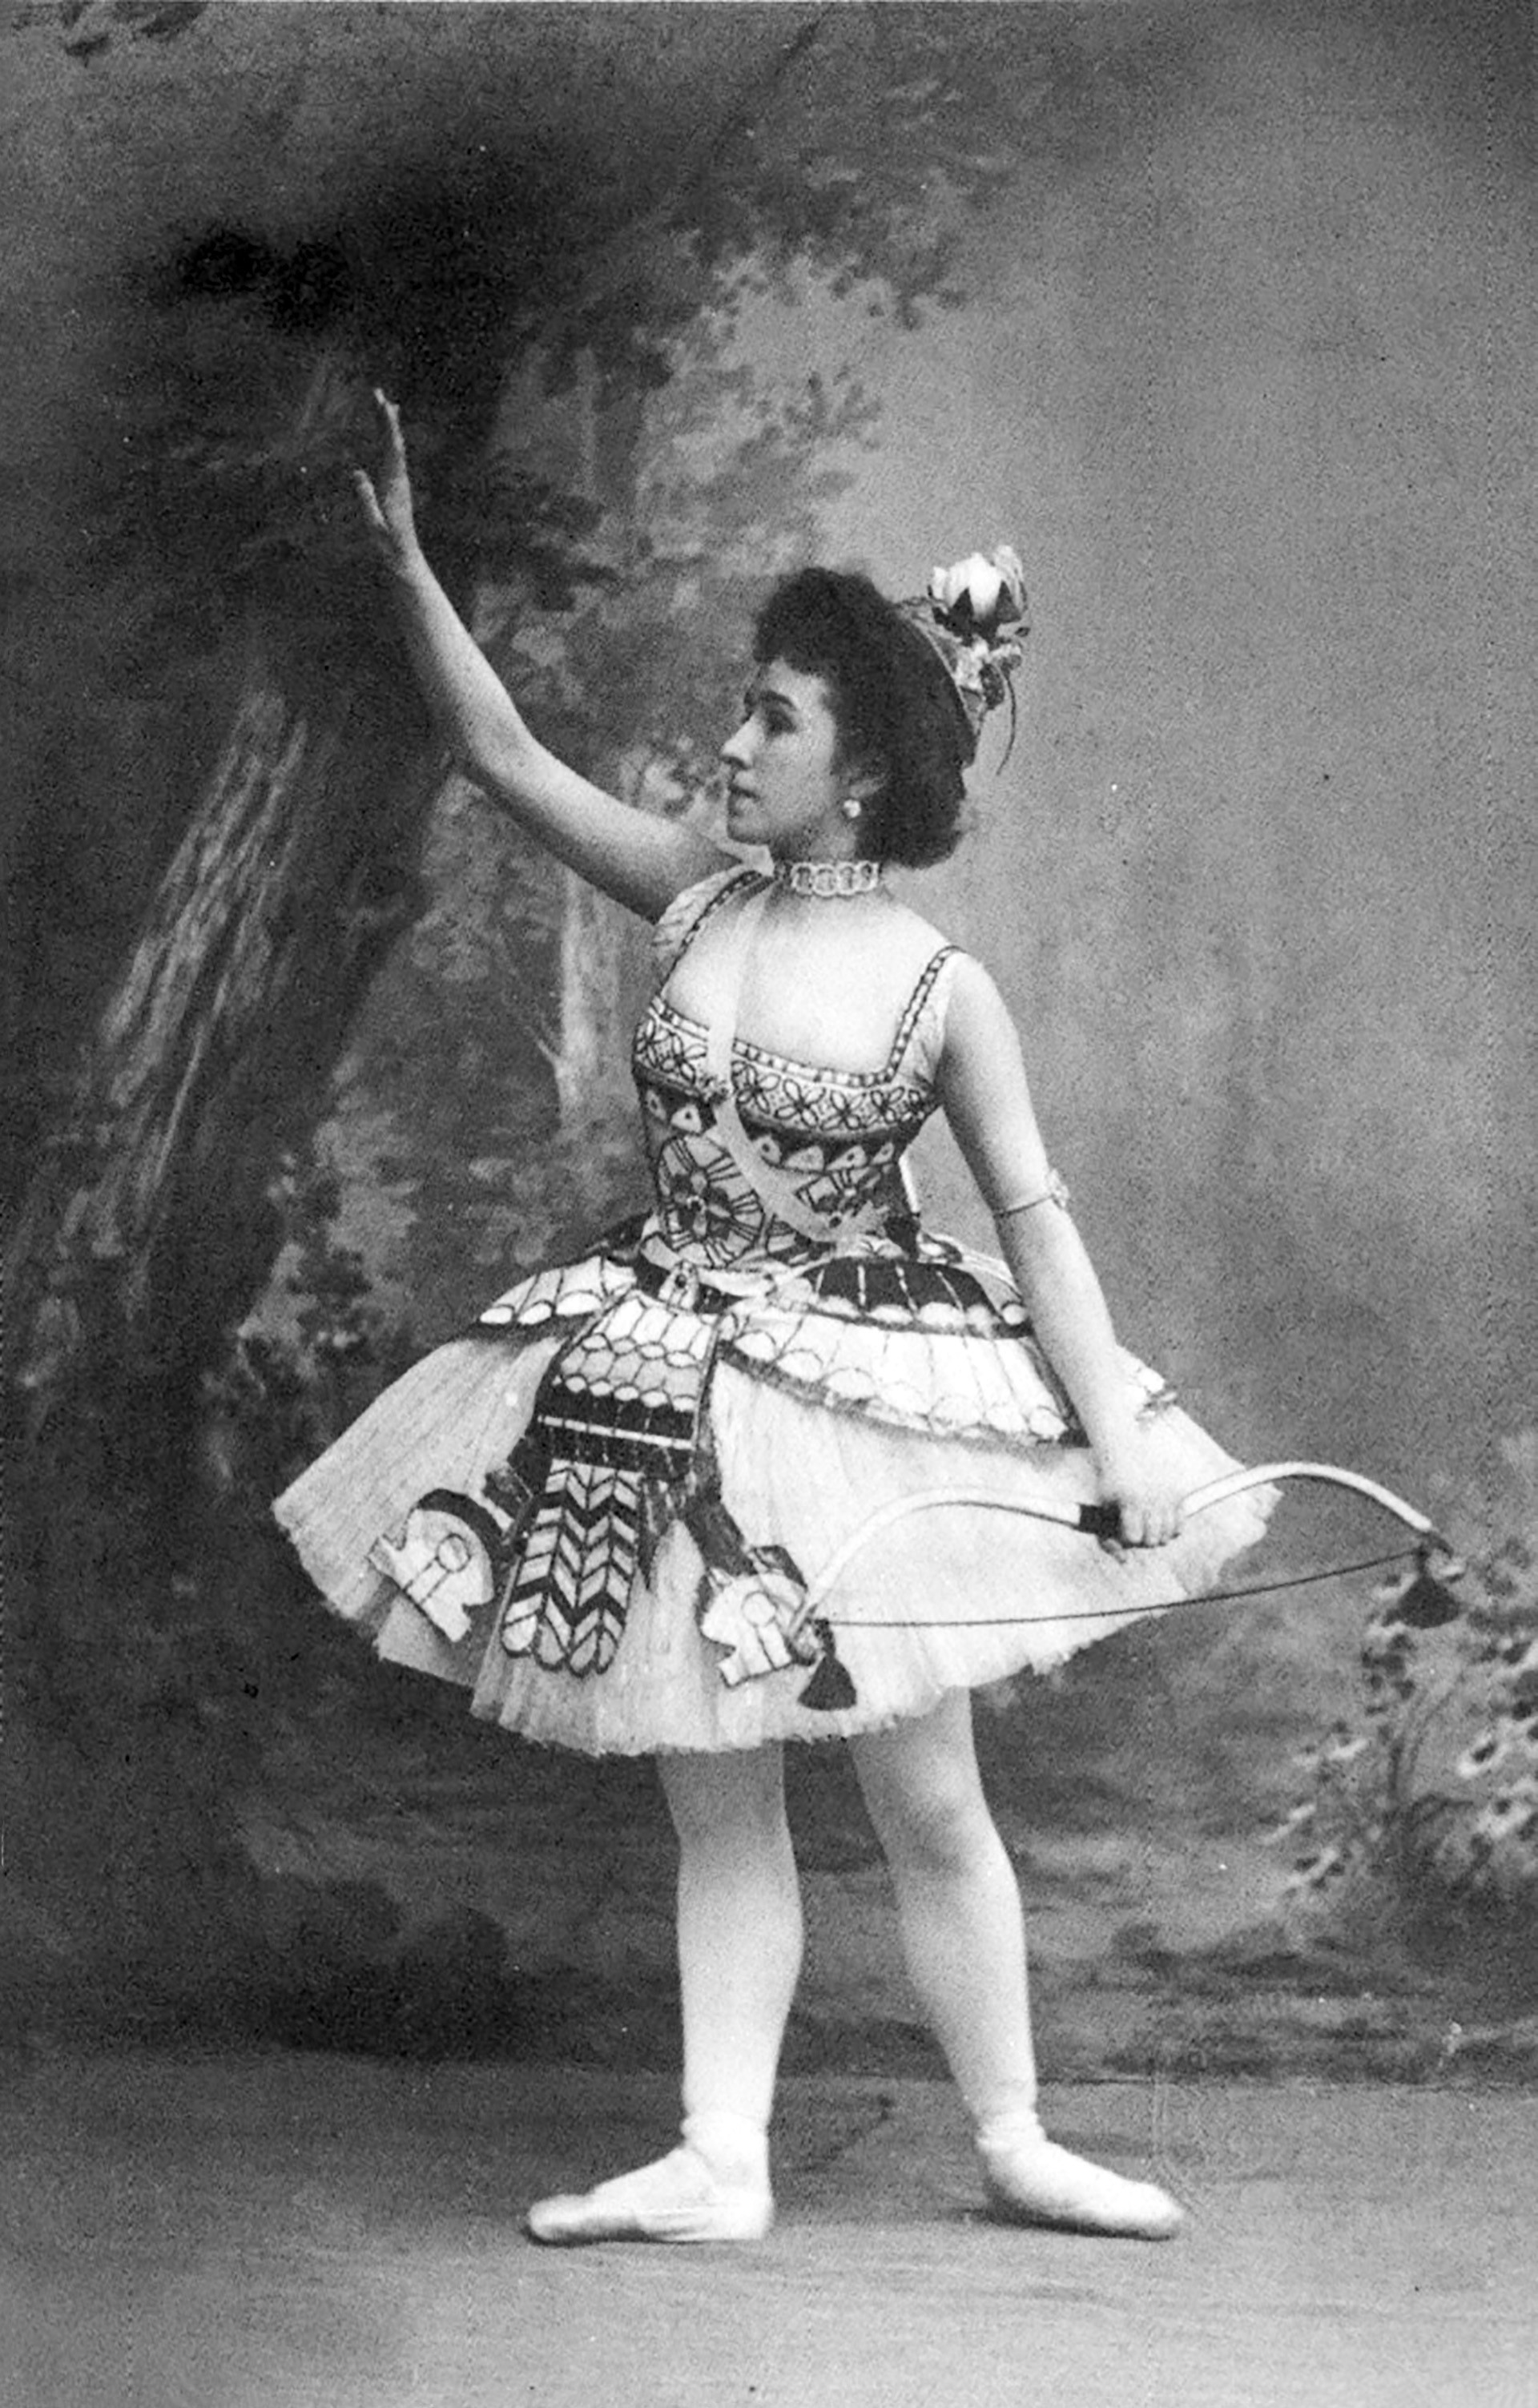 Photographic postcard of Mathilde Kschessinska costumed as the Princess Aspicia in the Grand pas des chasseresses from 'The Pharaoh's Daughter' ballet, 1898-1899